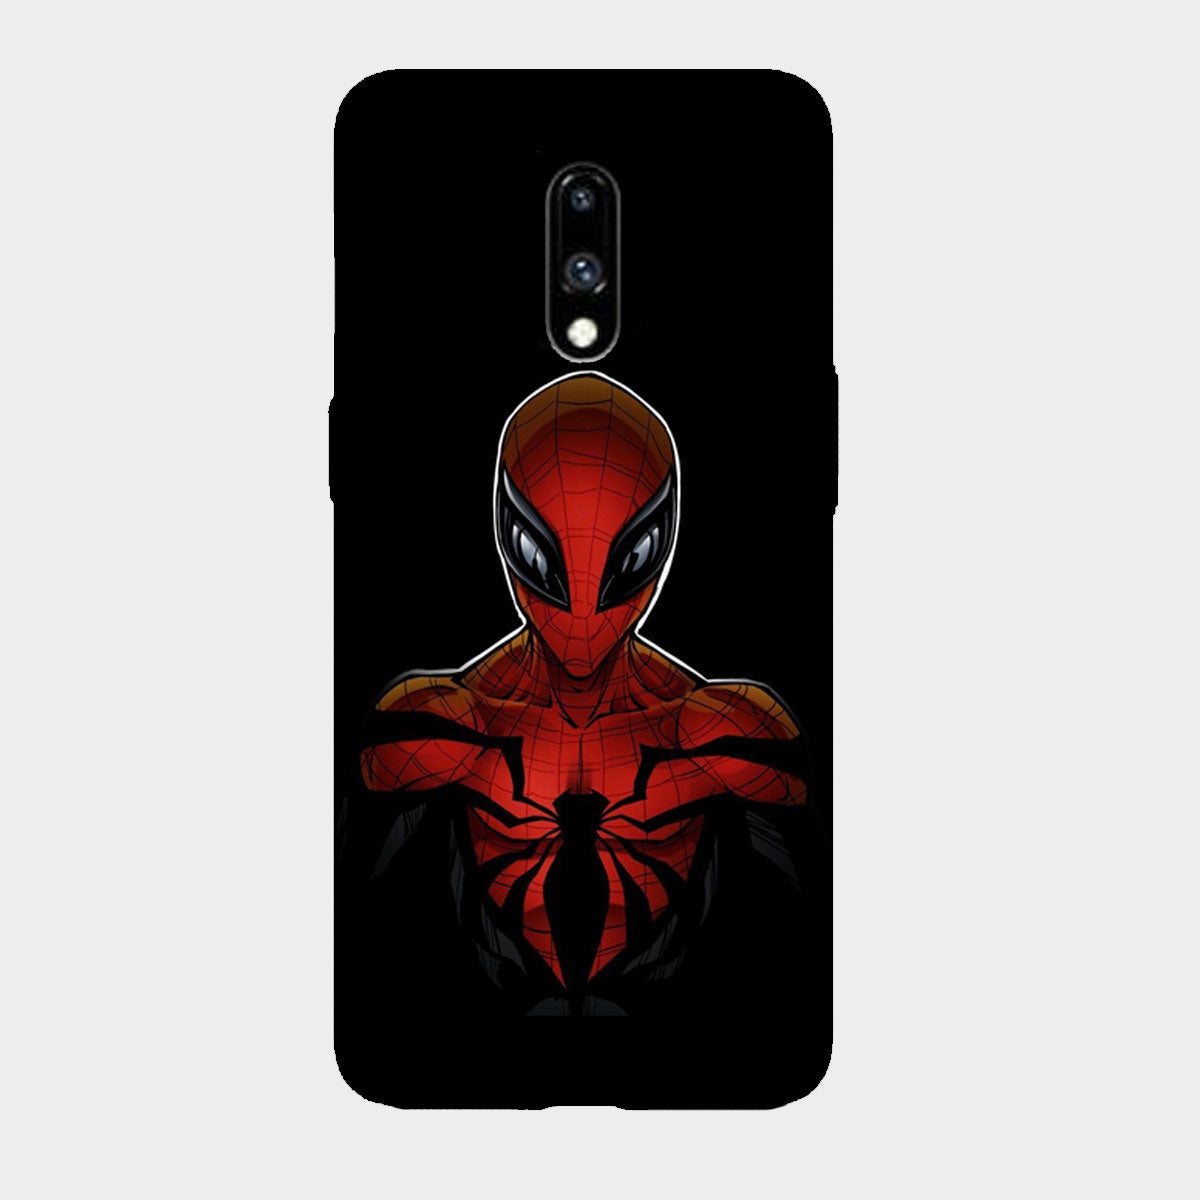 Spider Man - Animated - Mobile Phone Cover - Hard Case - OnePlus